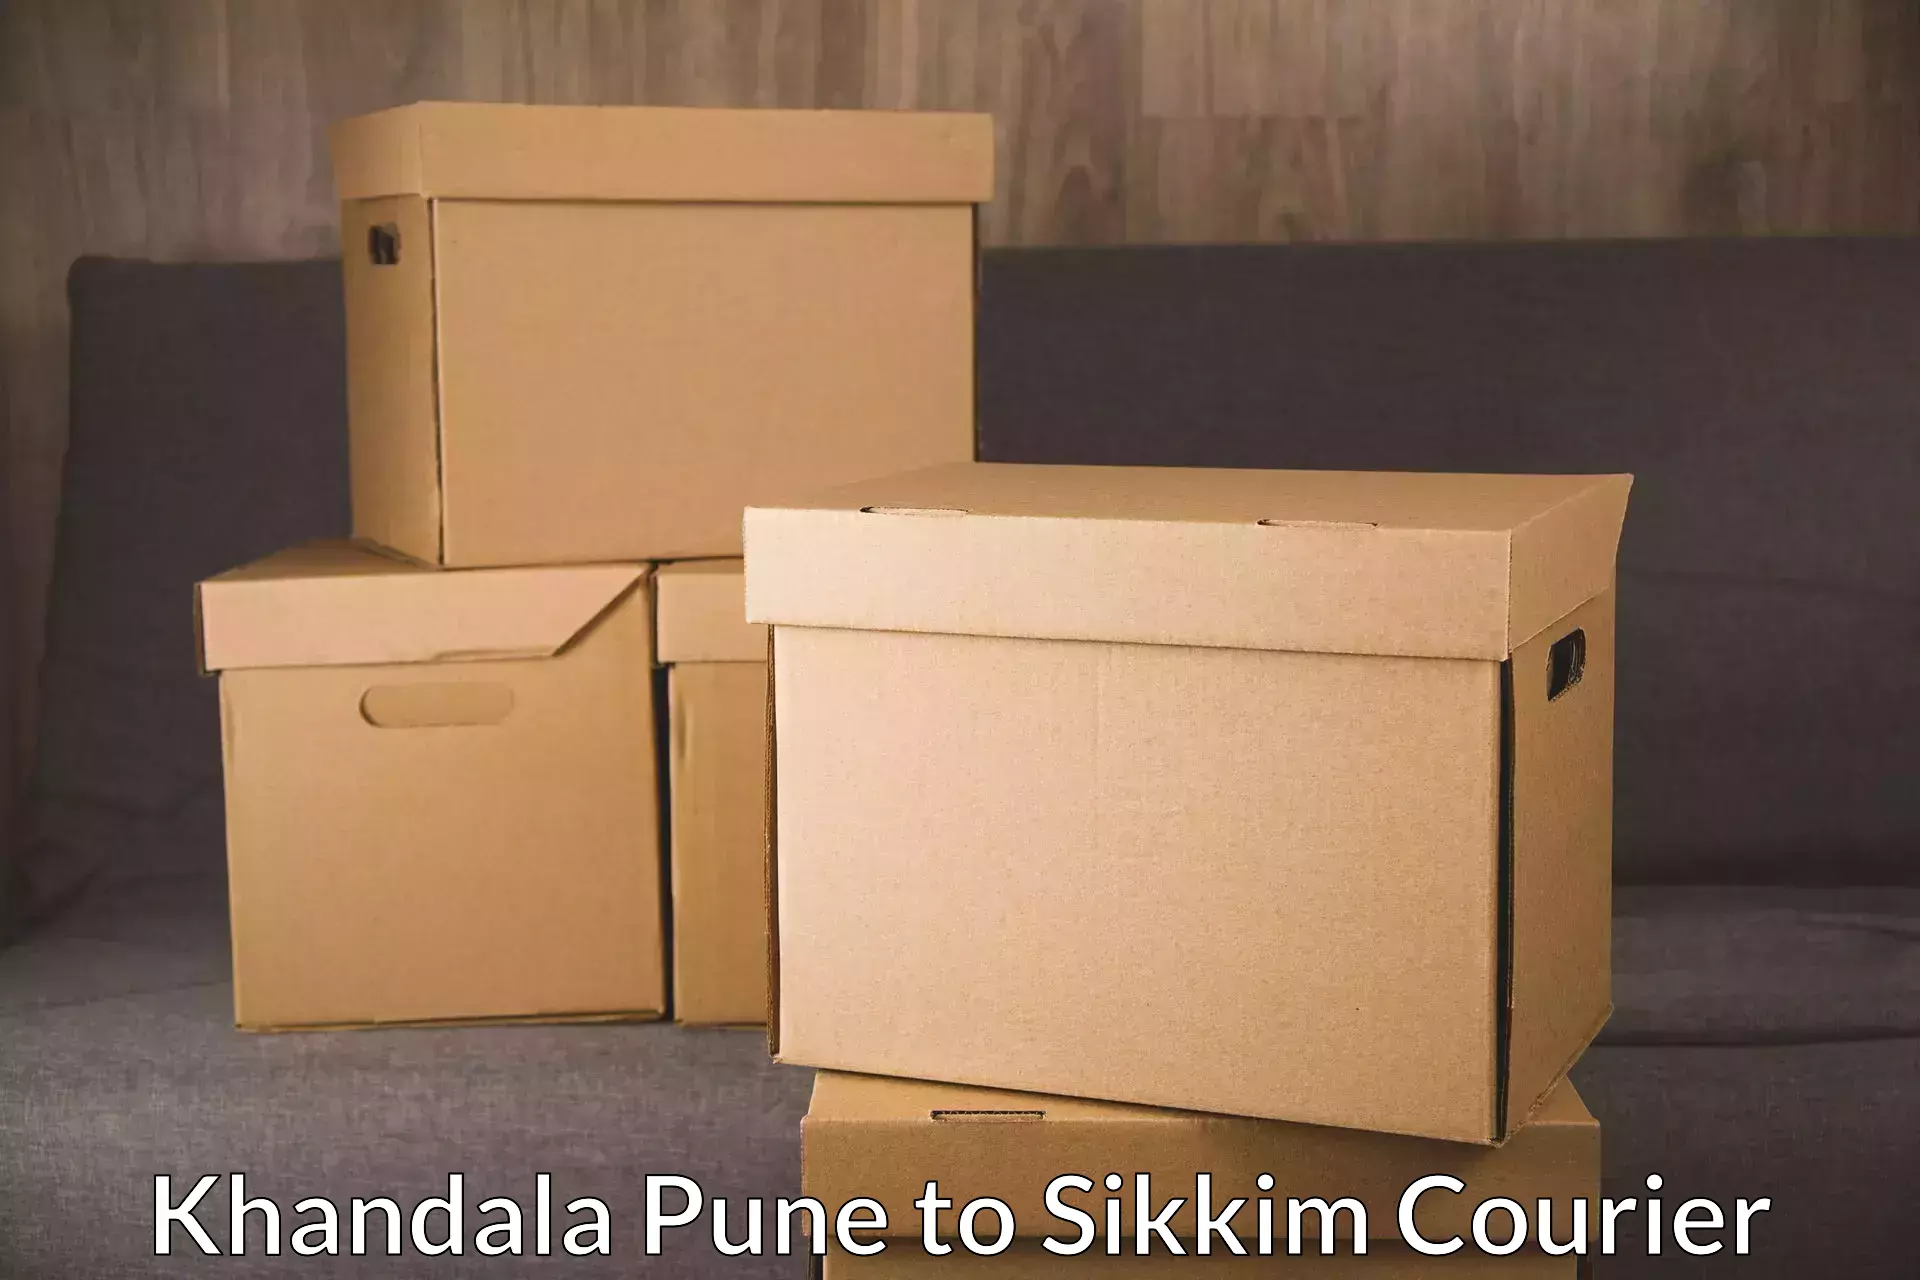 State-of-the-art courier technology Khandala Pune to Geyzing